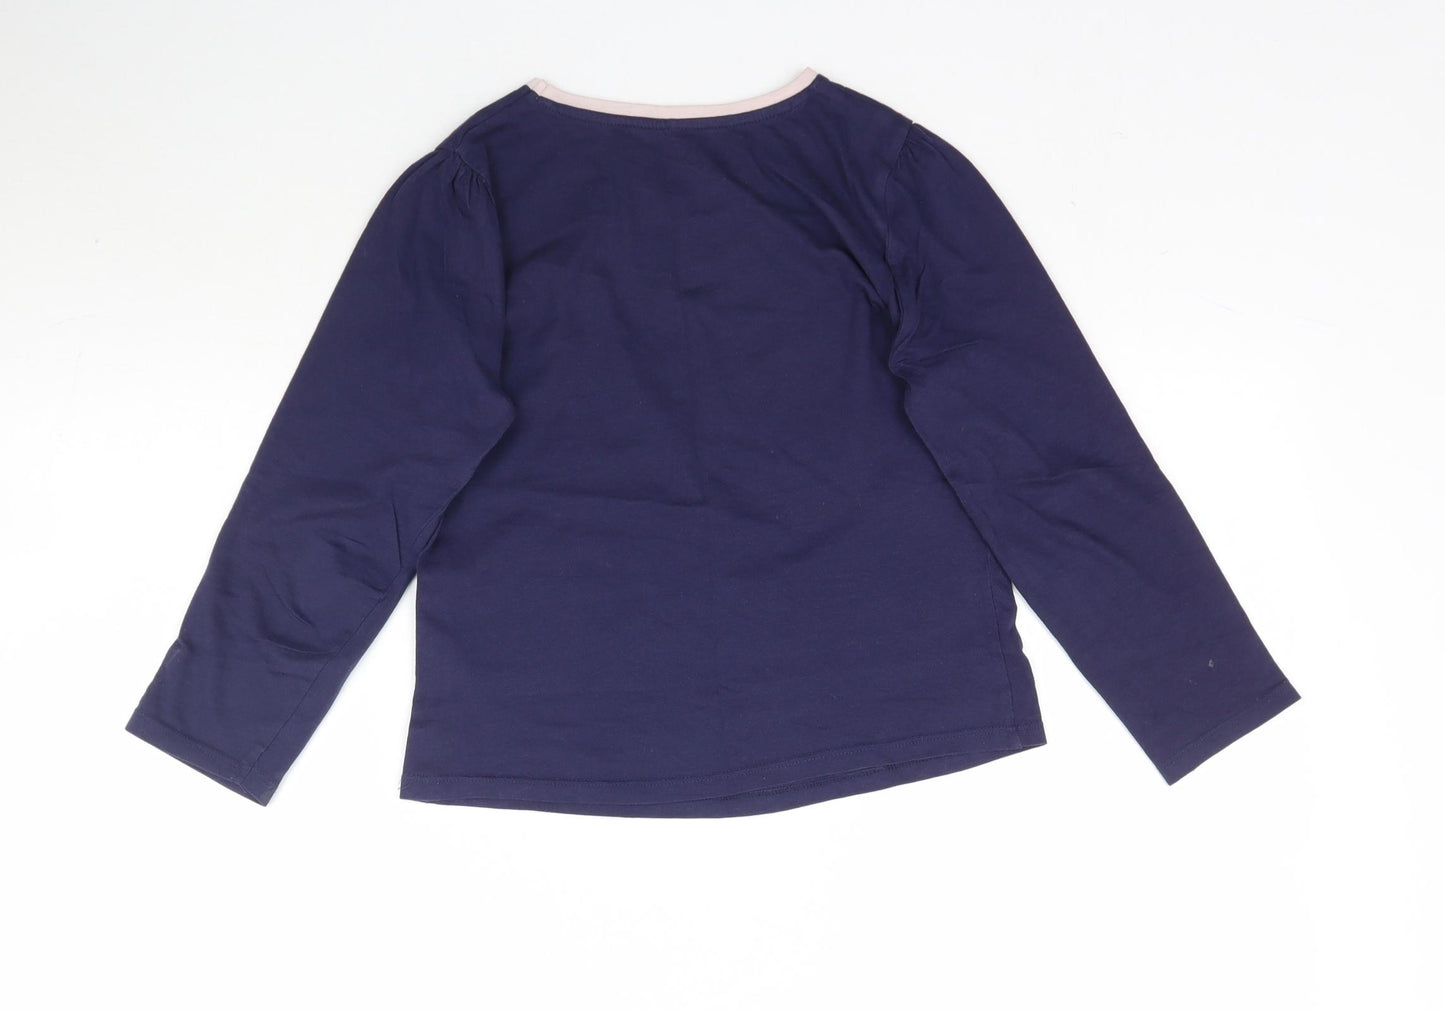 George Girls Blue Solid  Top Pyjama Top Size 8-9 Years  - Today you are a star